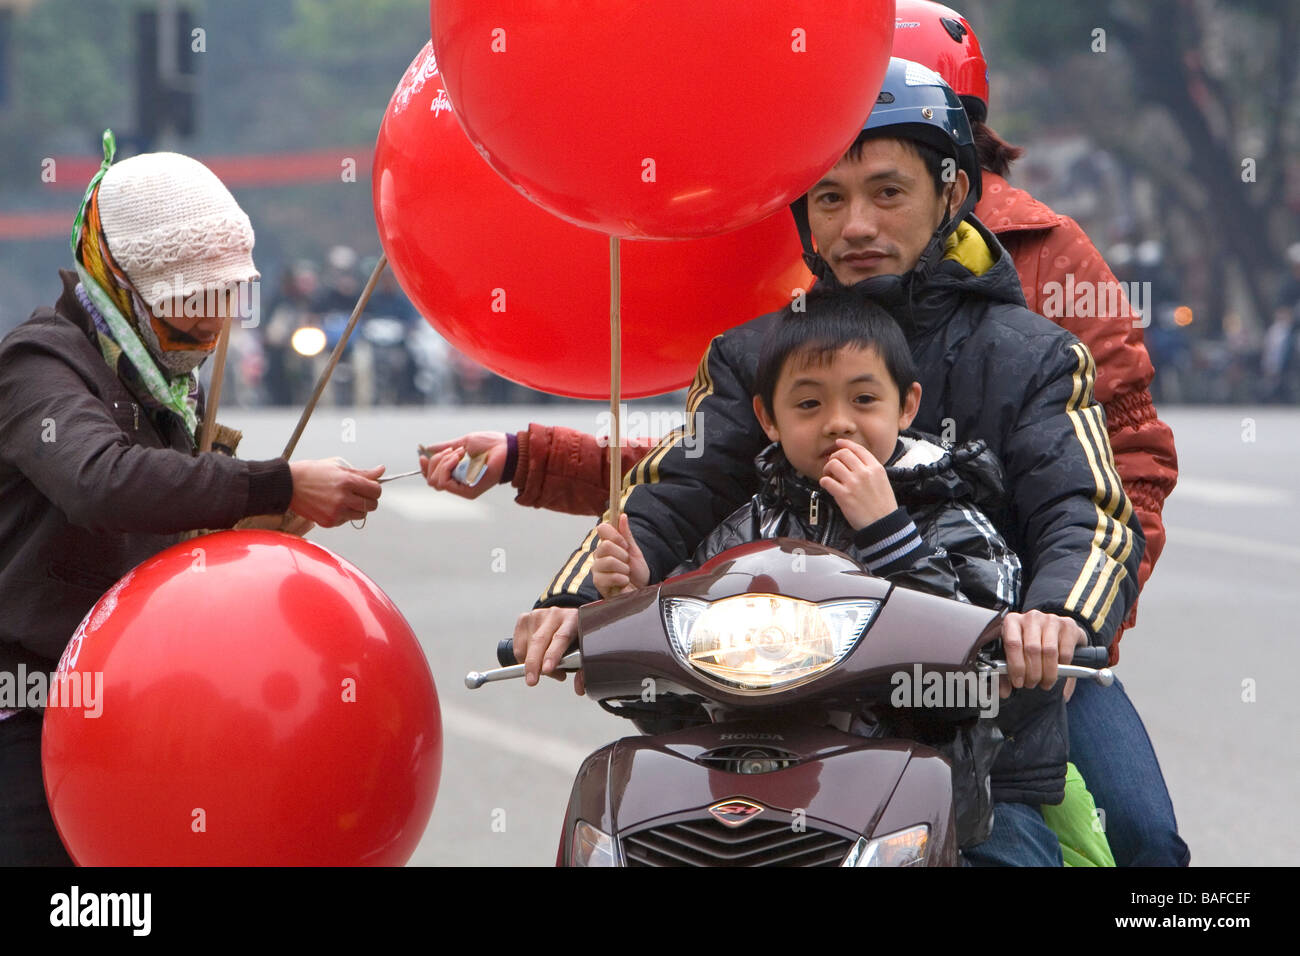 Vietnamese family on a motorbike purchase a balloon from a street vendor in Hanoi Vietnam Stock Photo